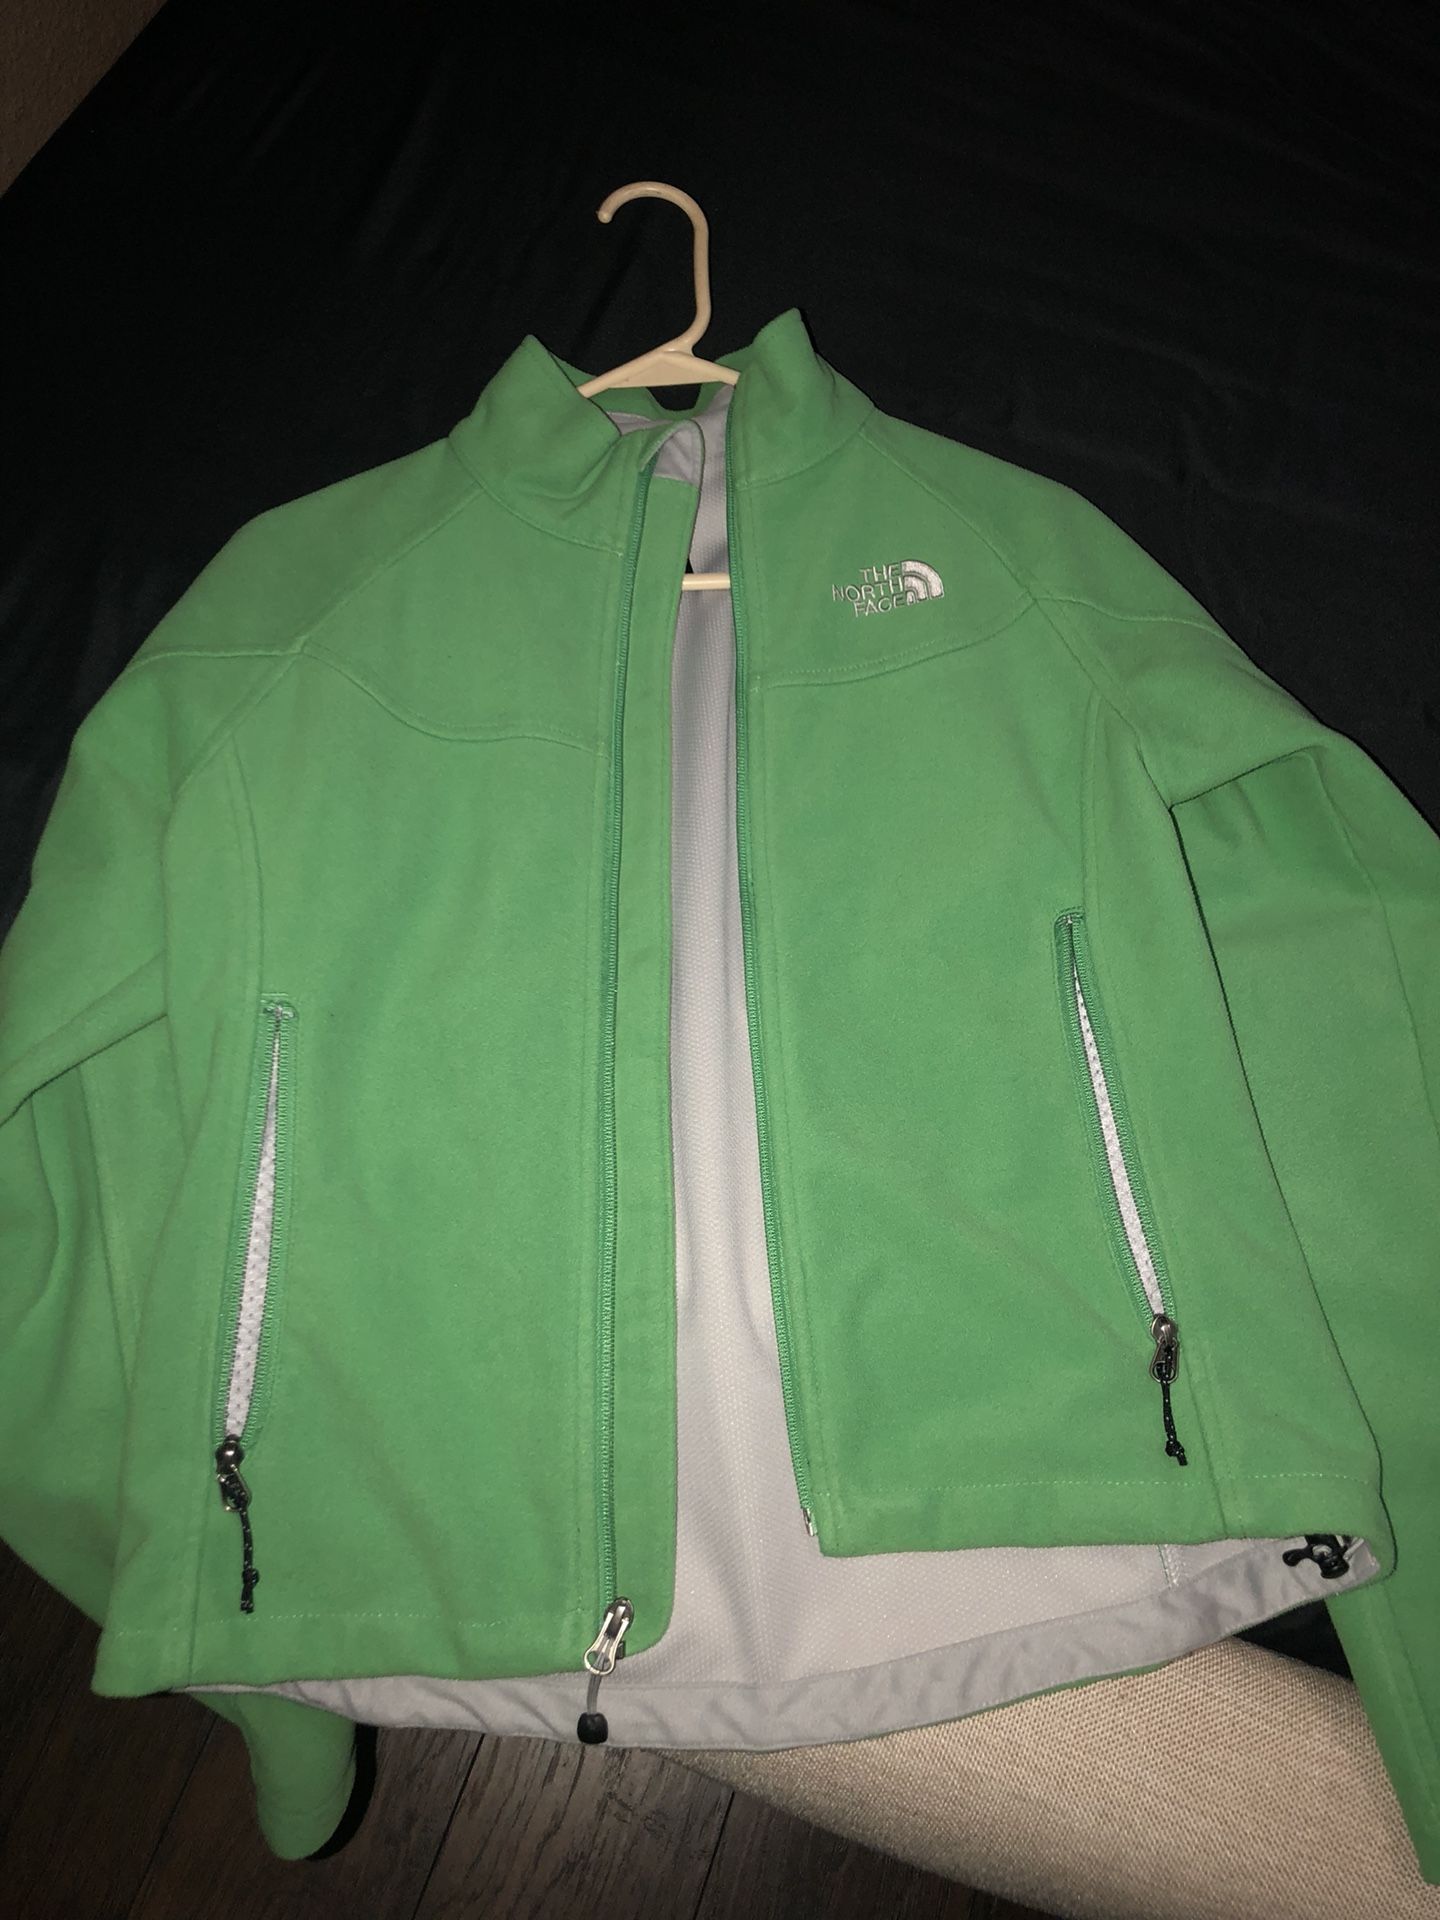 The North face jacket